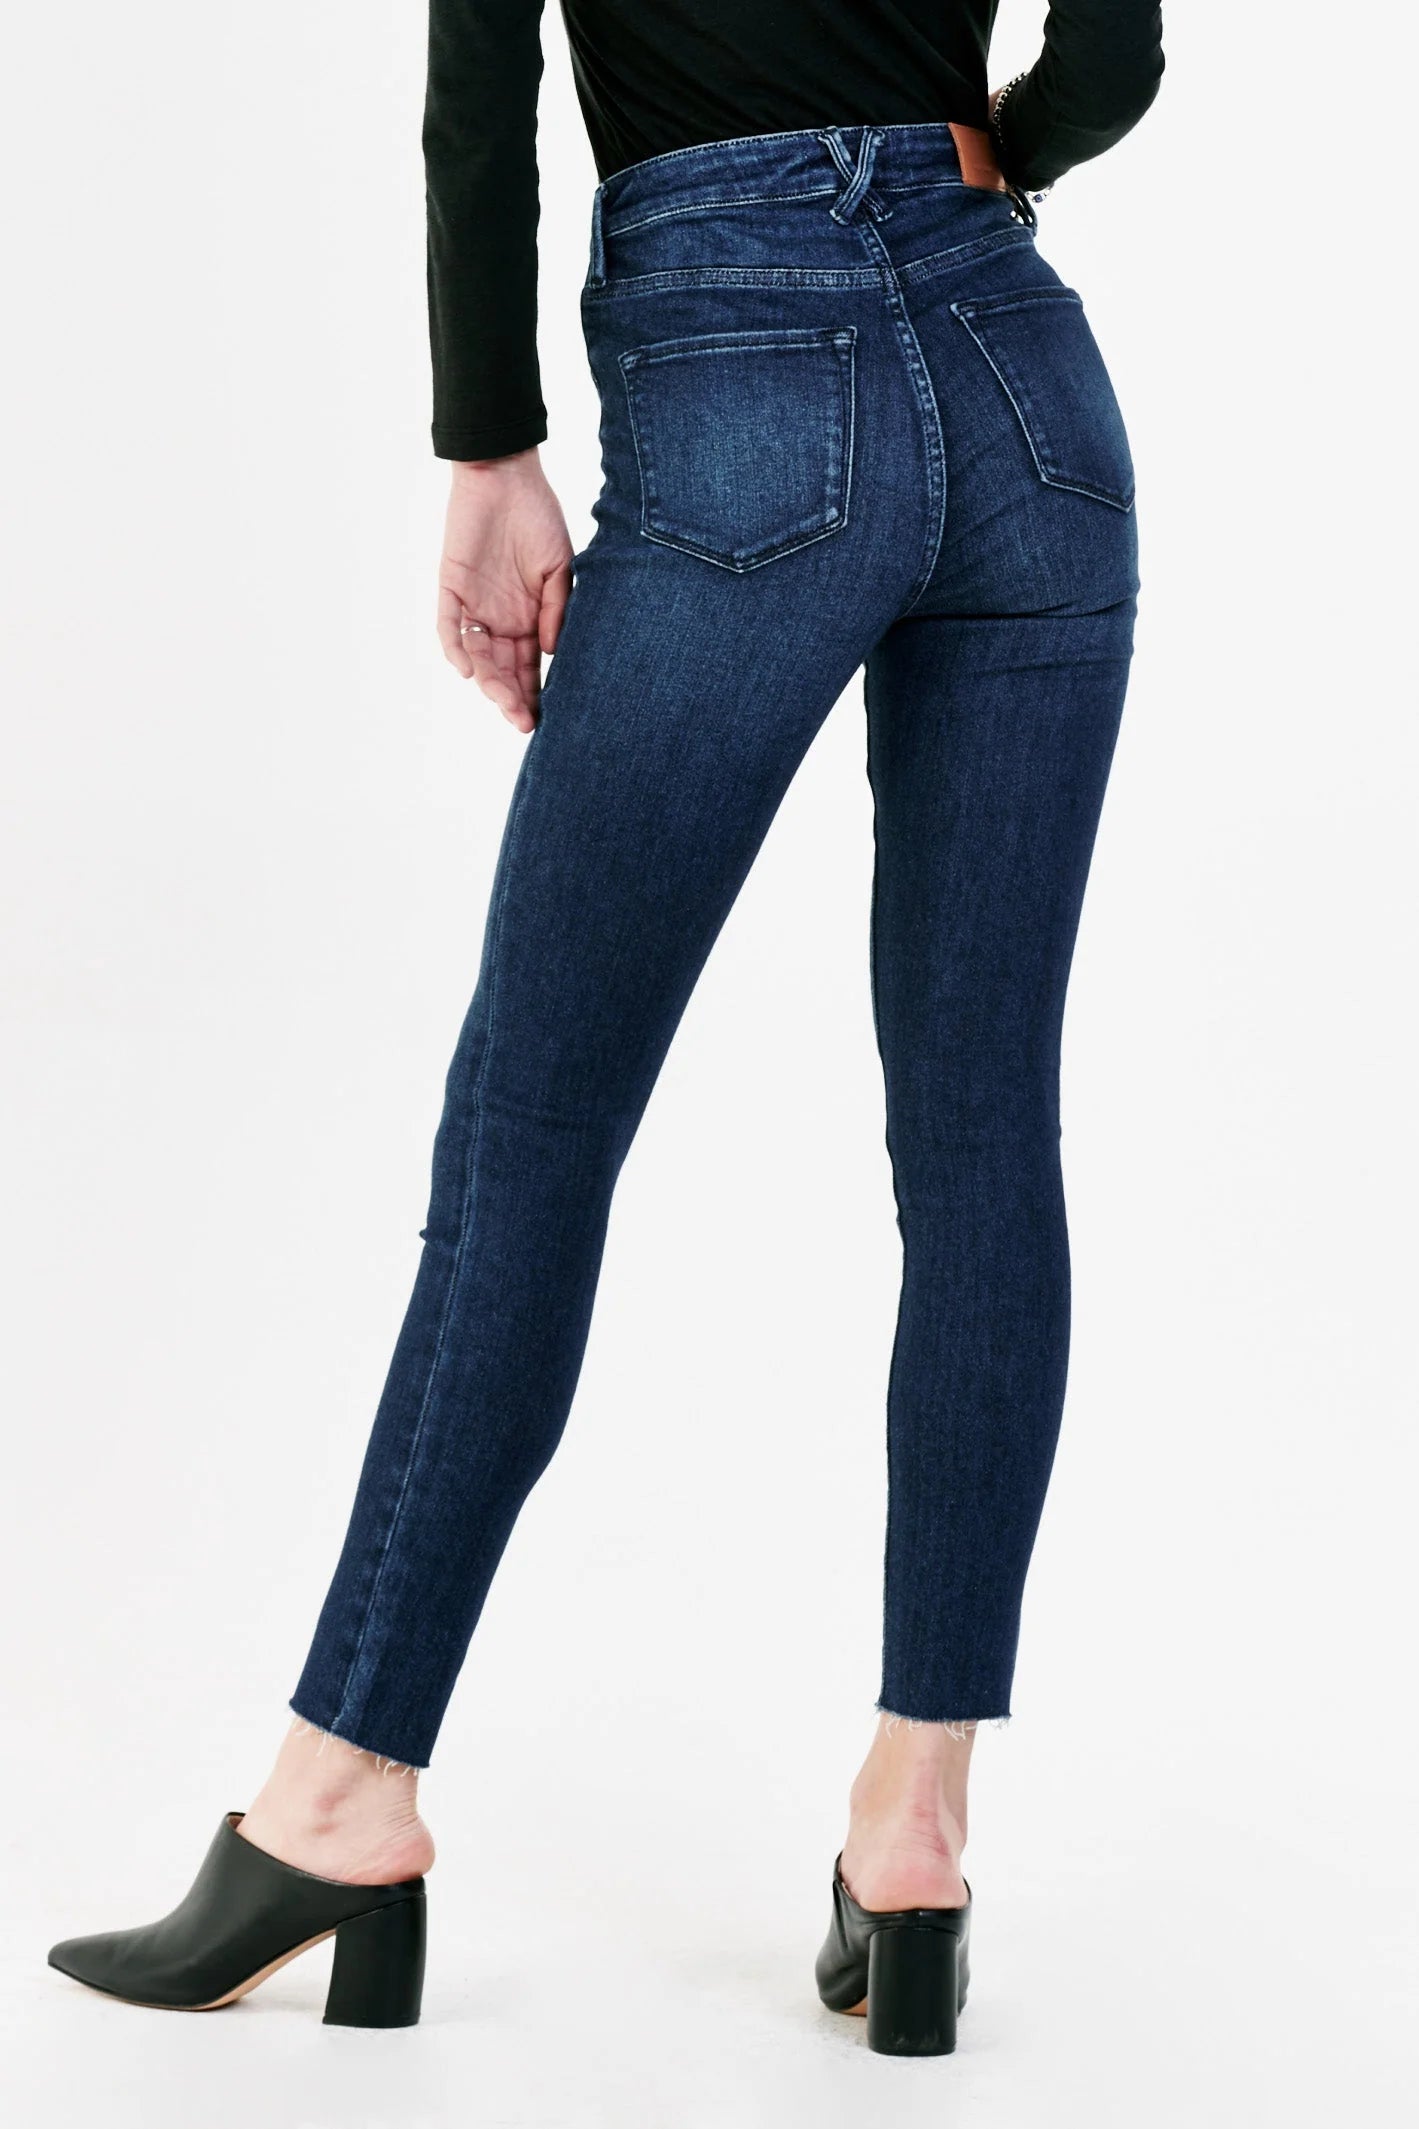 These J.Crew Jeans Come With Me on Every Trip